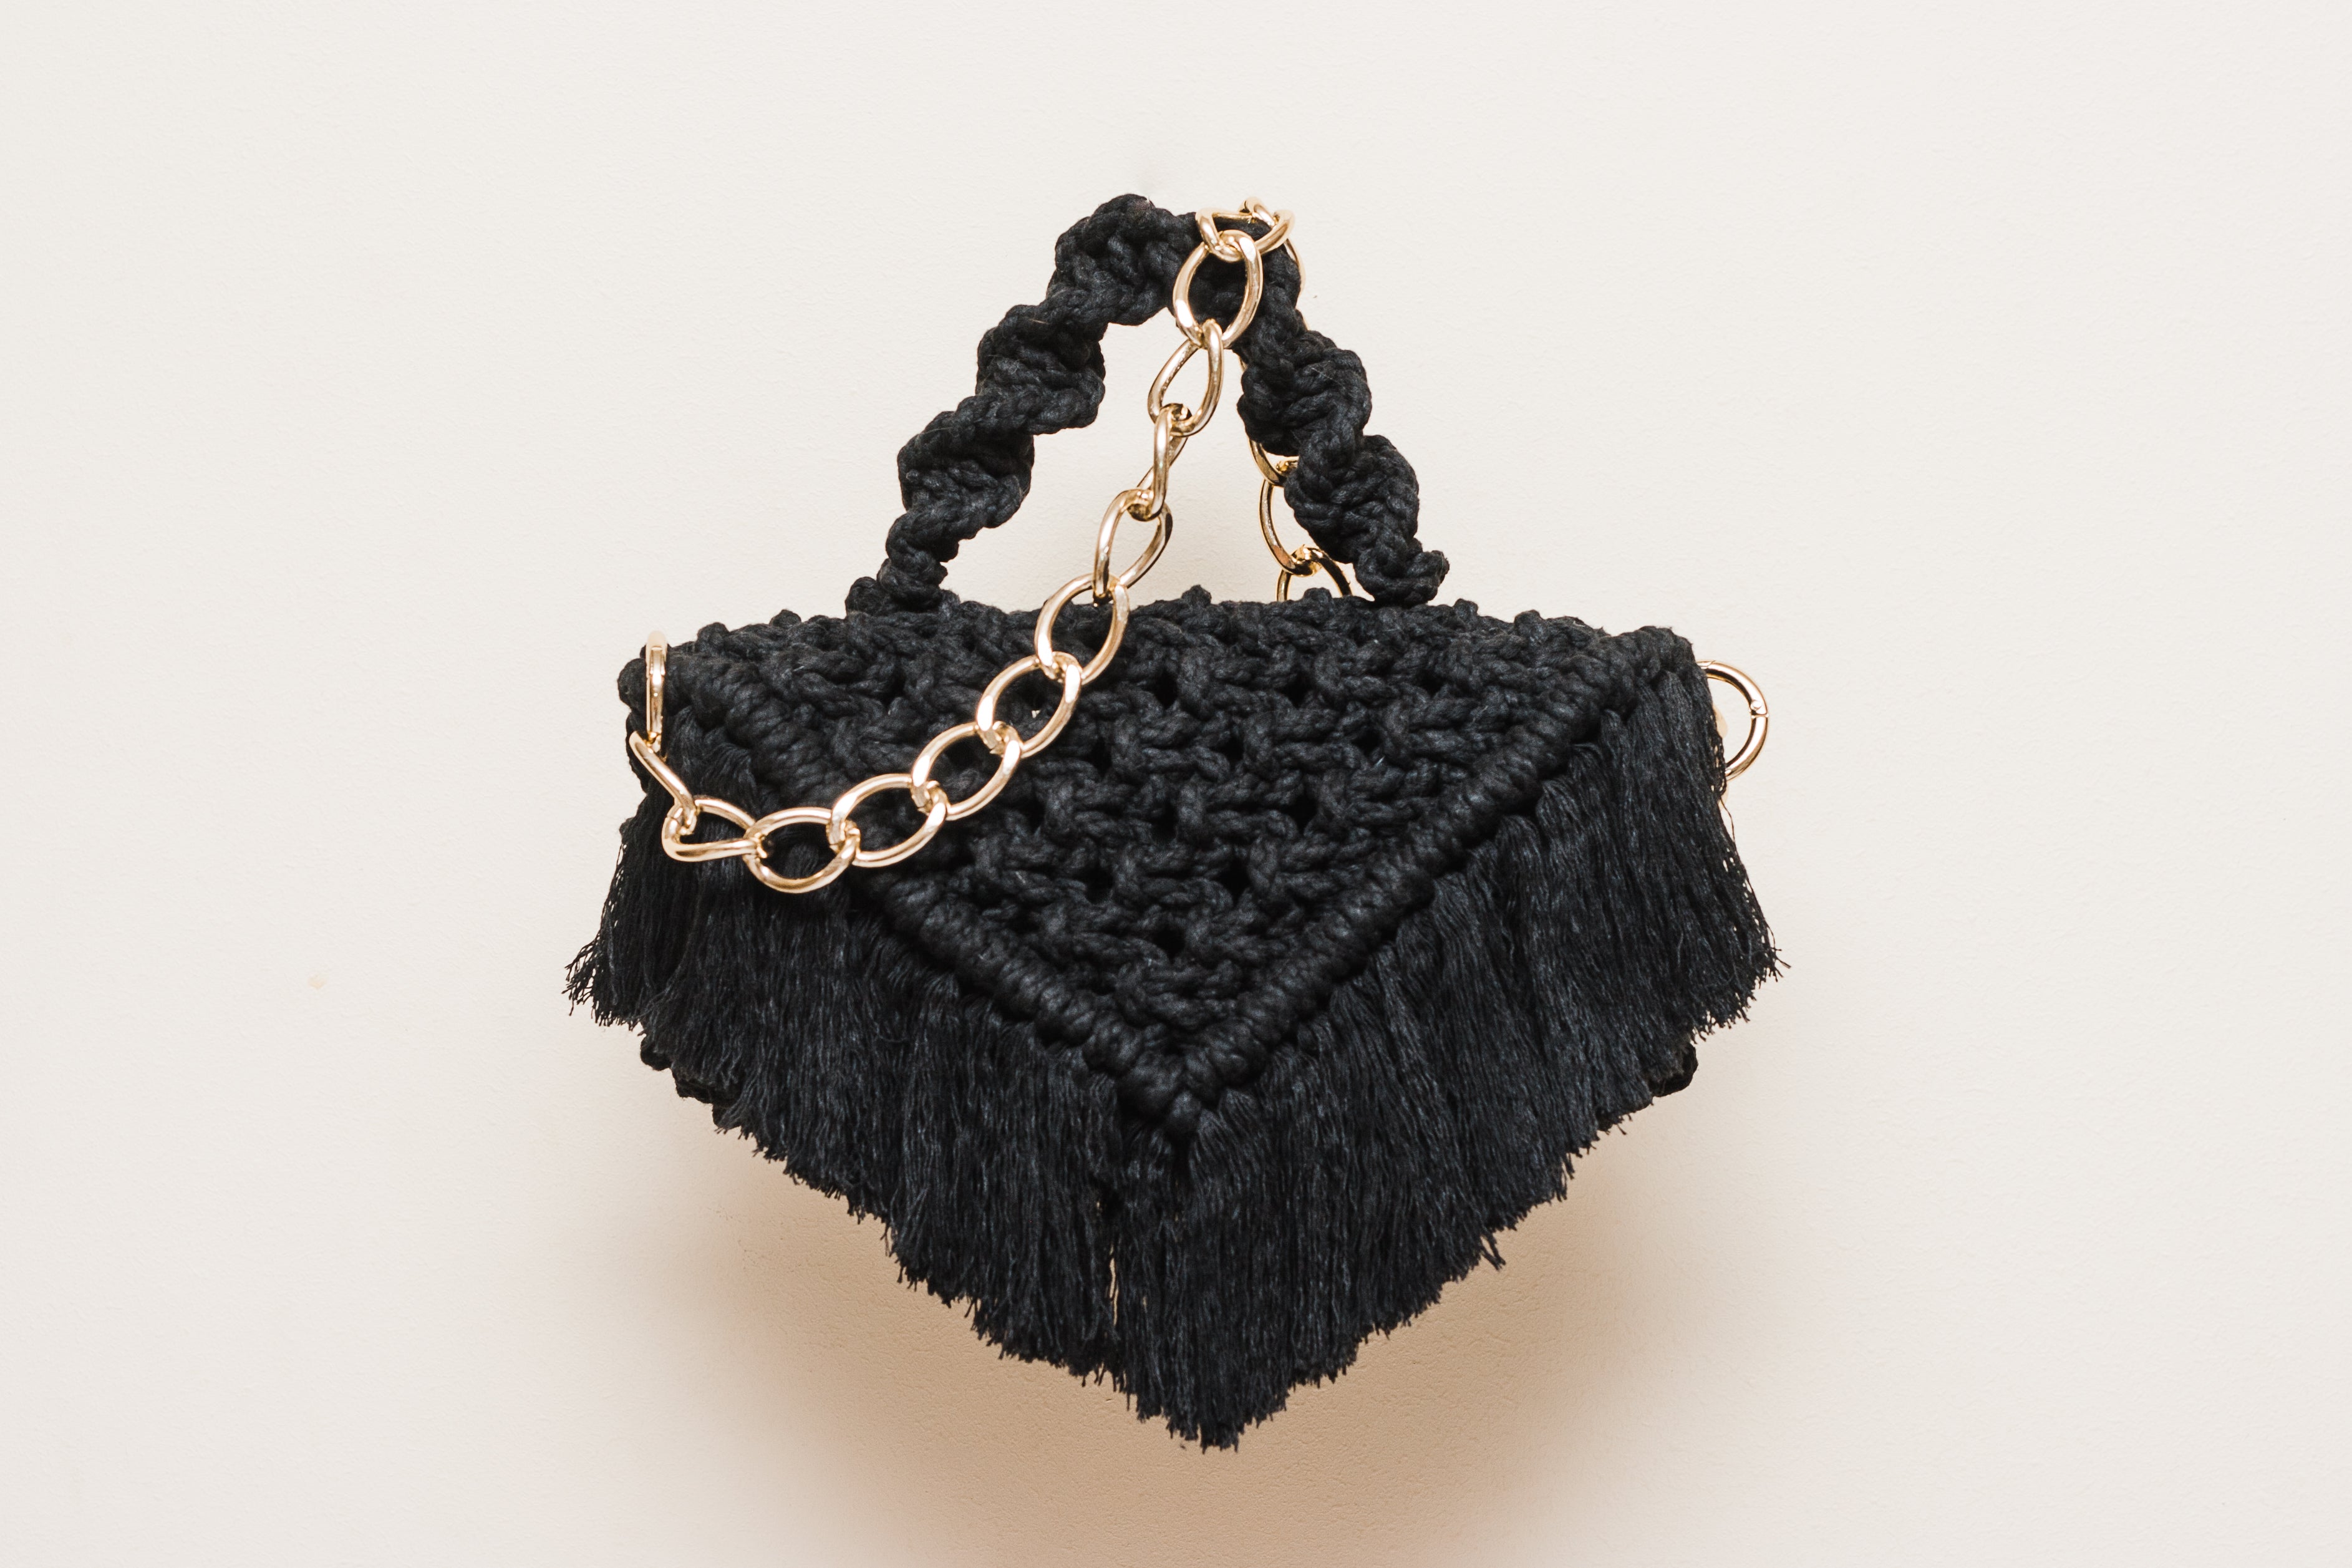 related-product-Negra Macrame Clutch